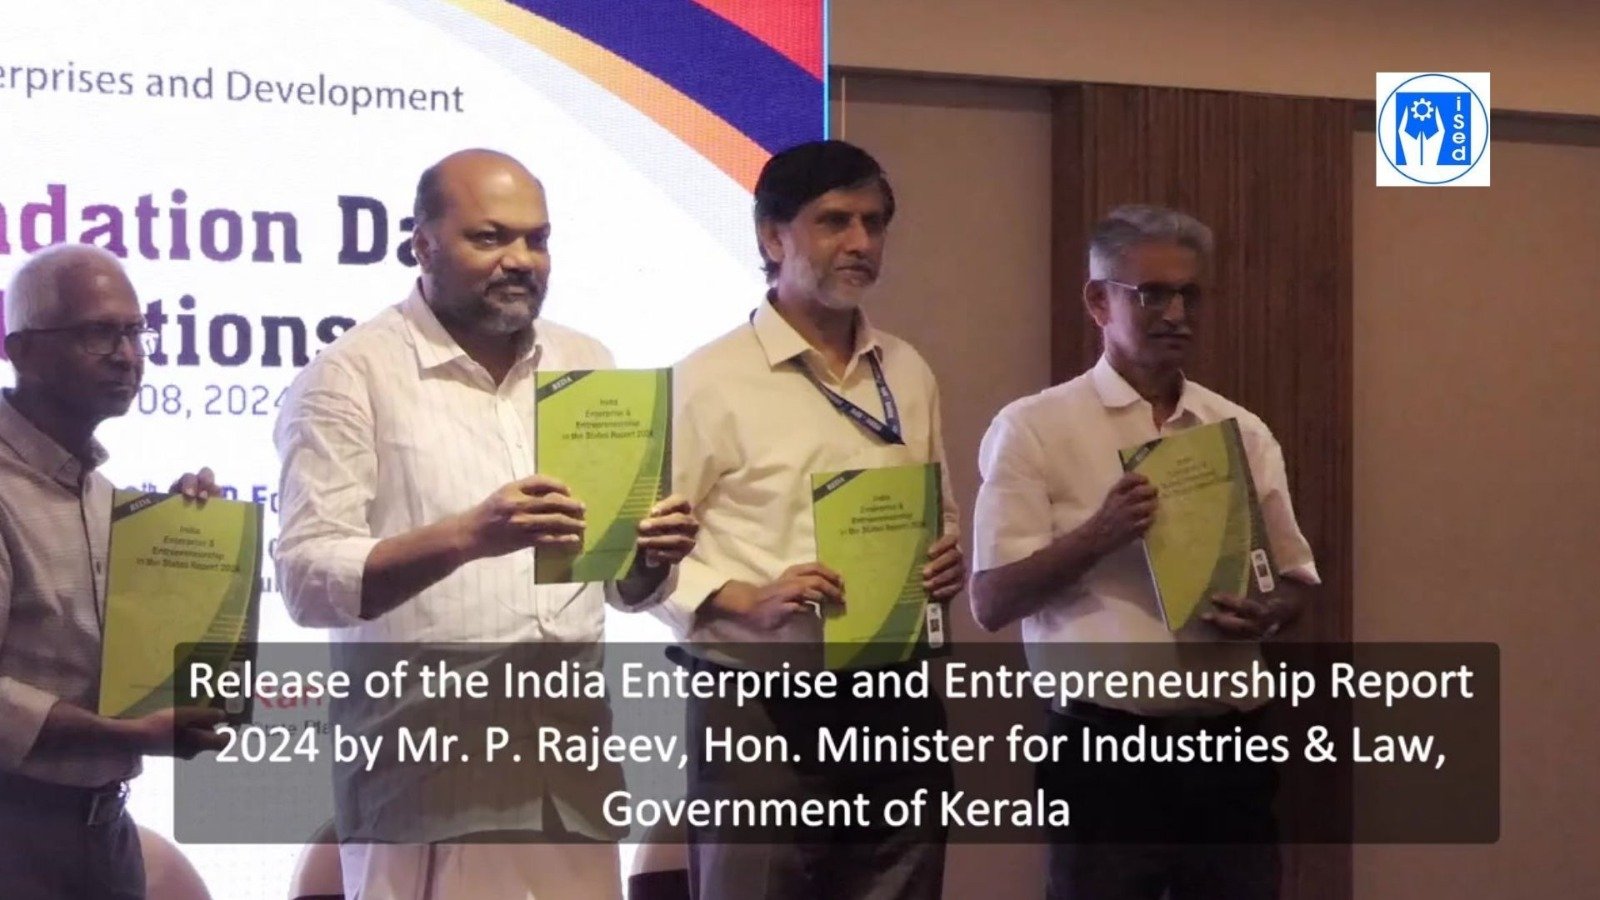 India Enterprise and Entrepreneurship Report 2024 Unveiled at ISED’s 36th Foundation Day